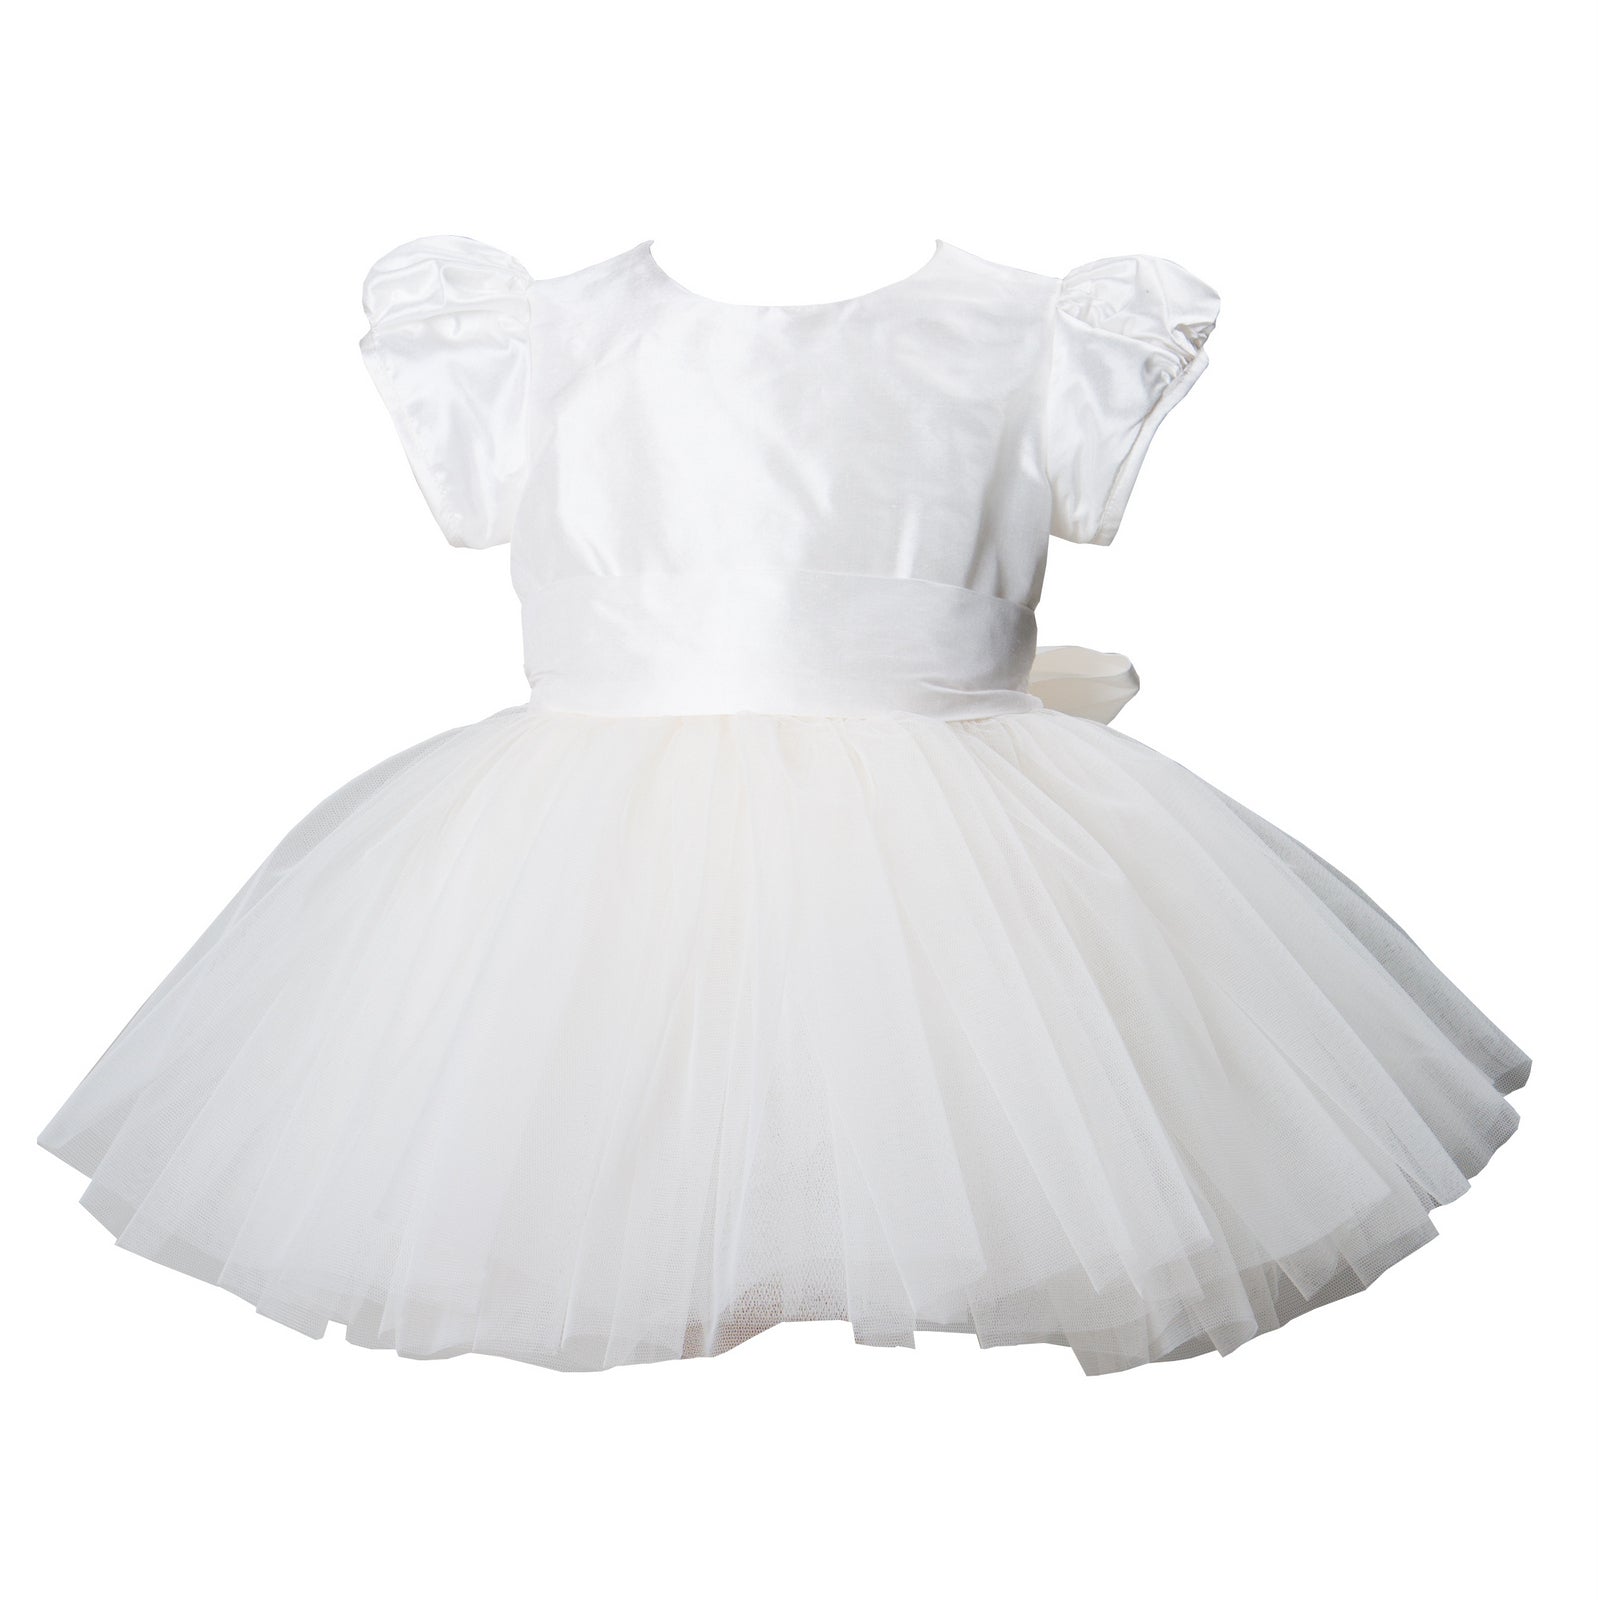 Shop Girls Gowns & Dresses at Sue Hill Childrenswear